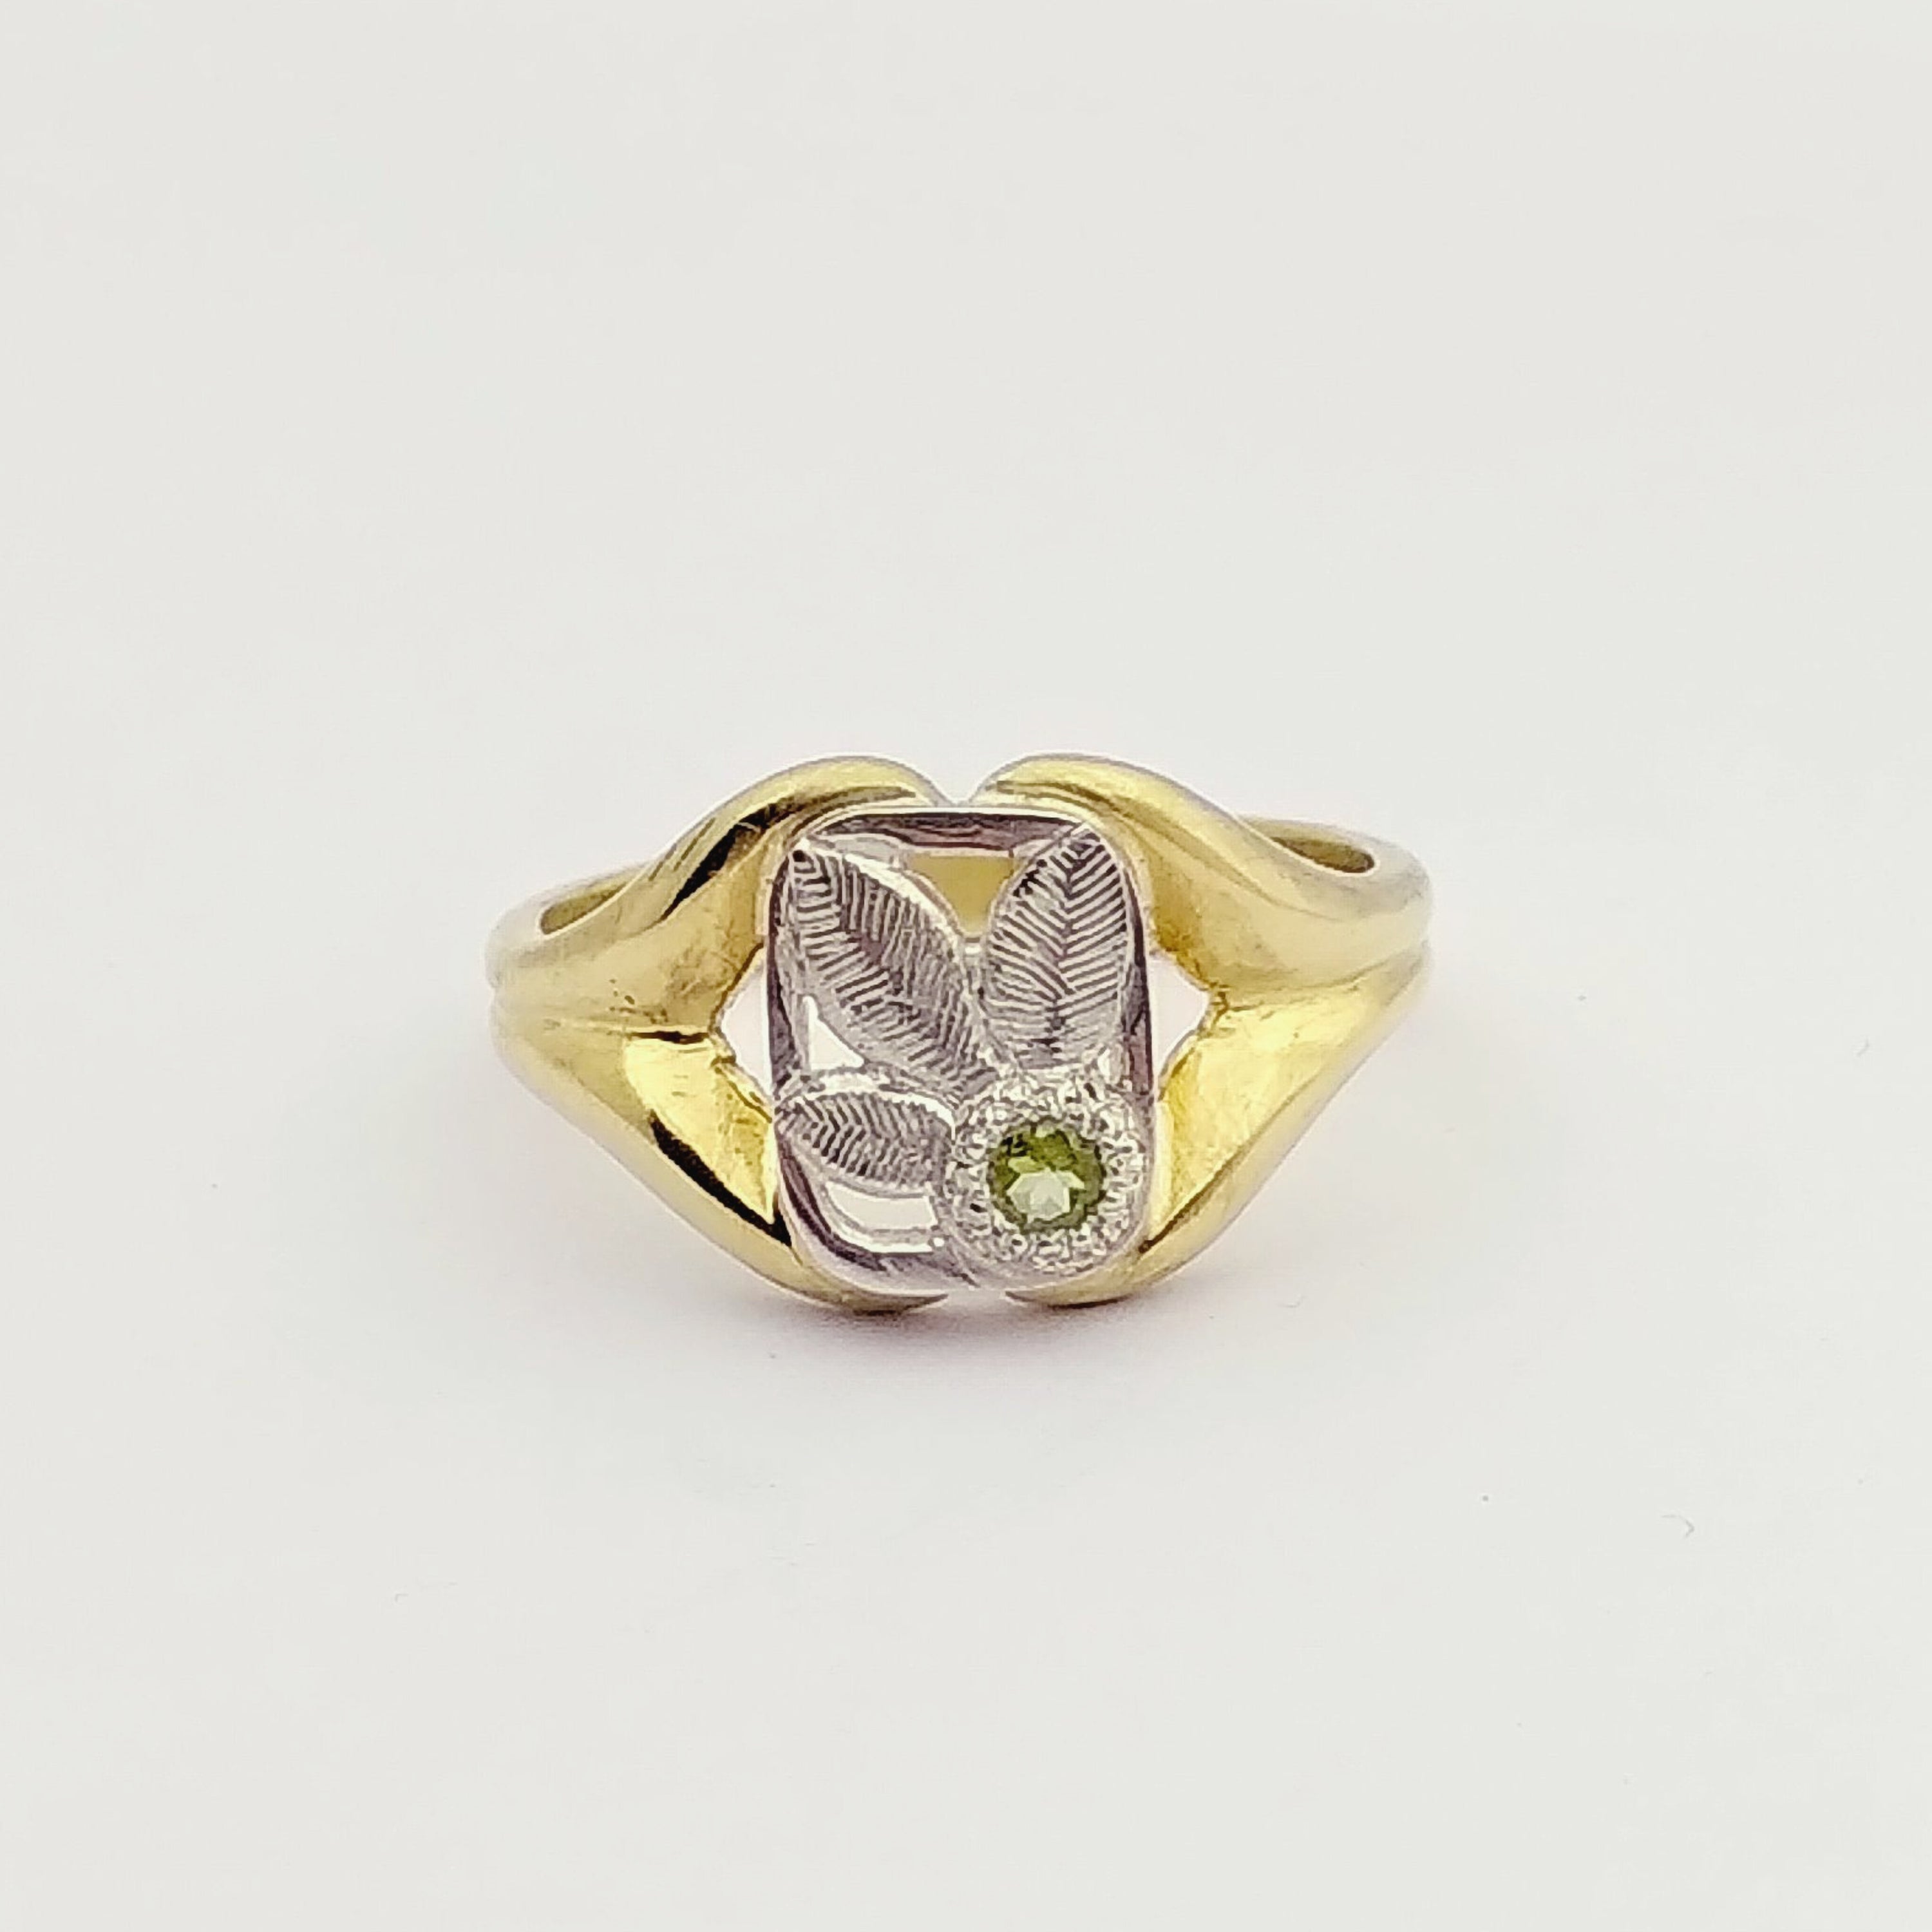 A gold ring with a silver top engraved in the shape of three leaves, with a small peridot gemtsone. Made by hand by Casez Jewellery.